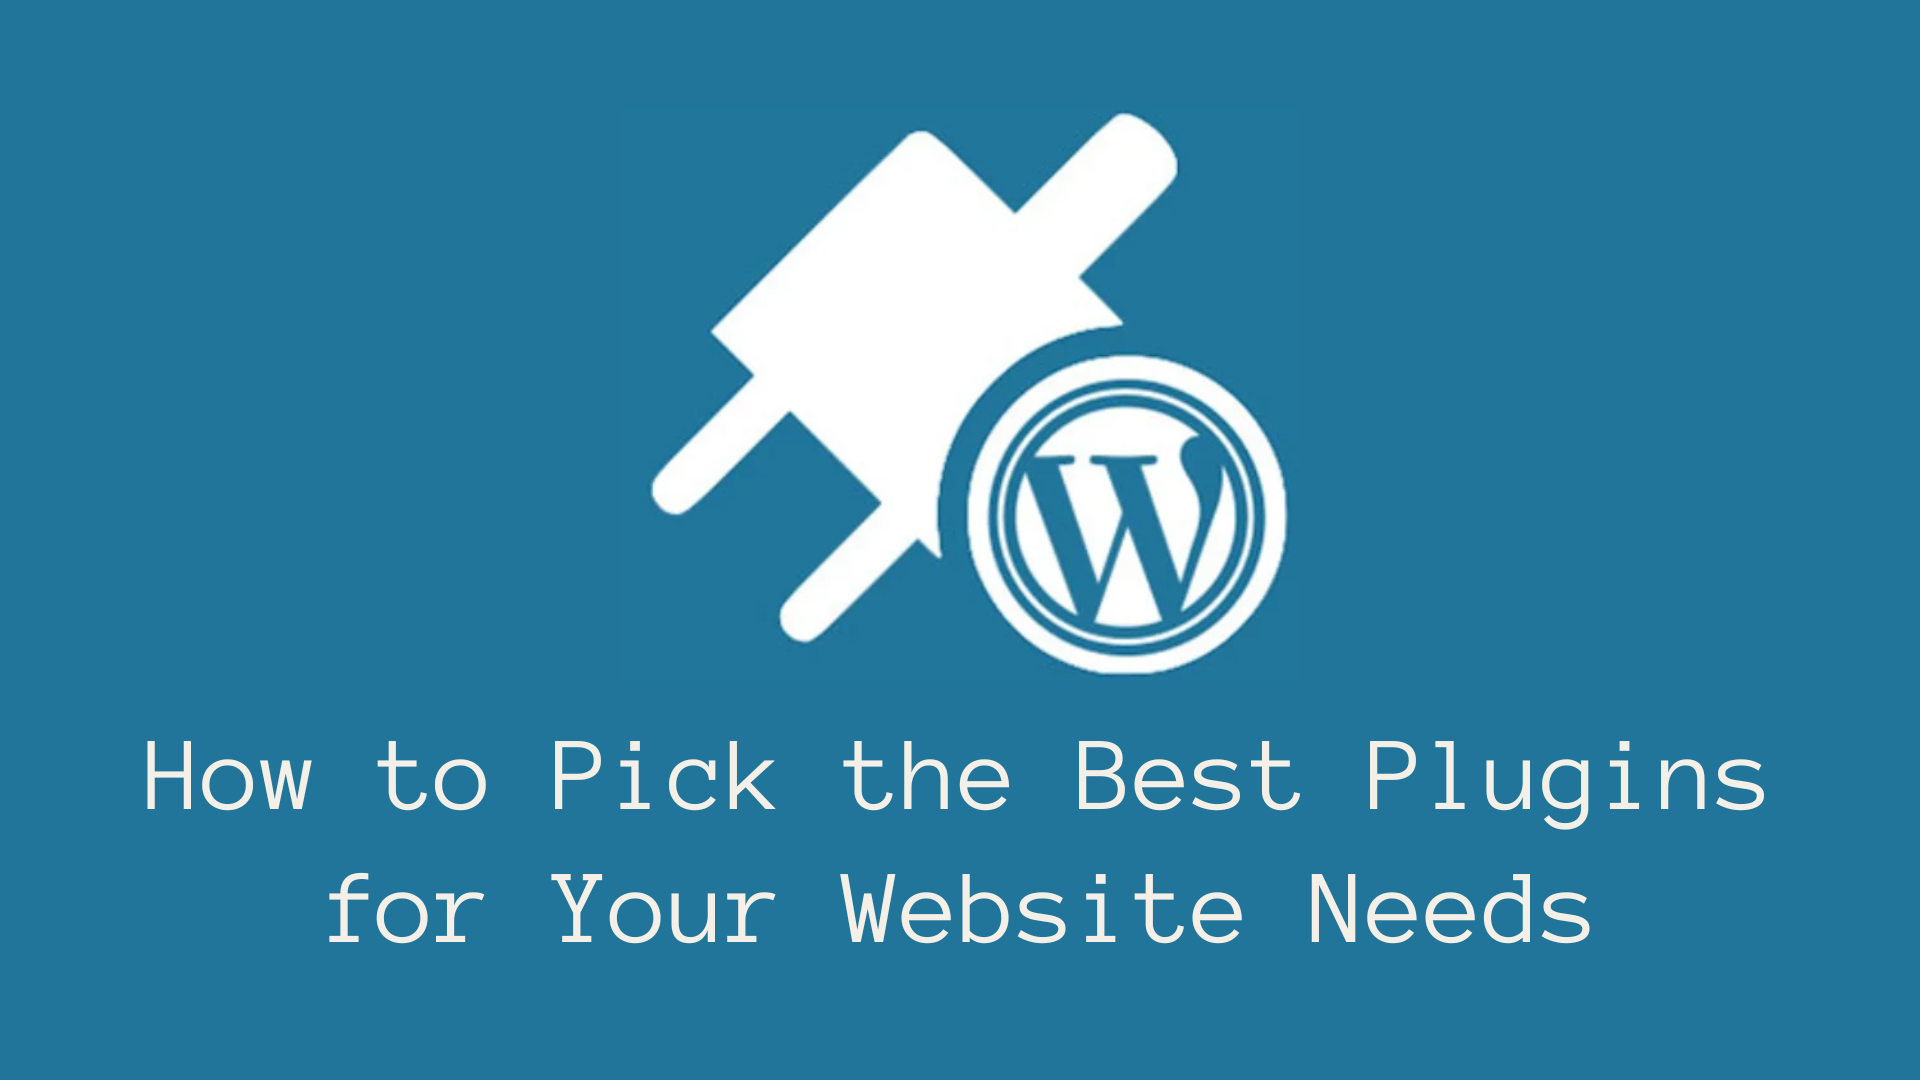 How to Pick the Best Plugins for Your Website Needs